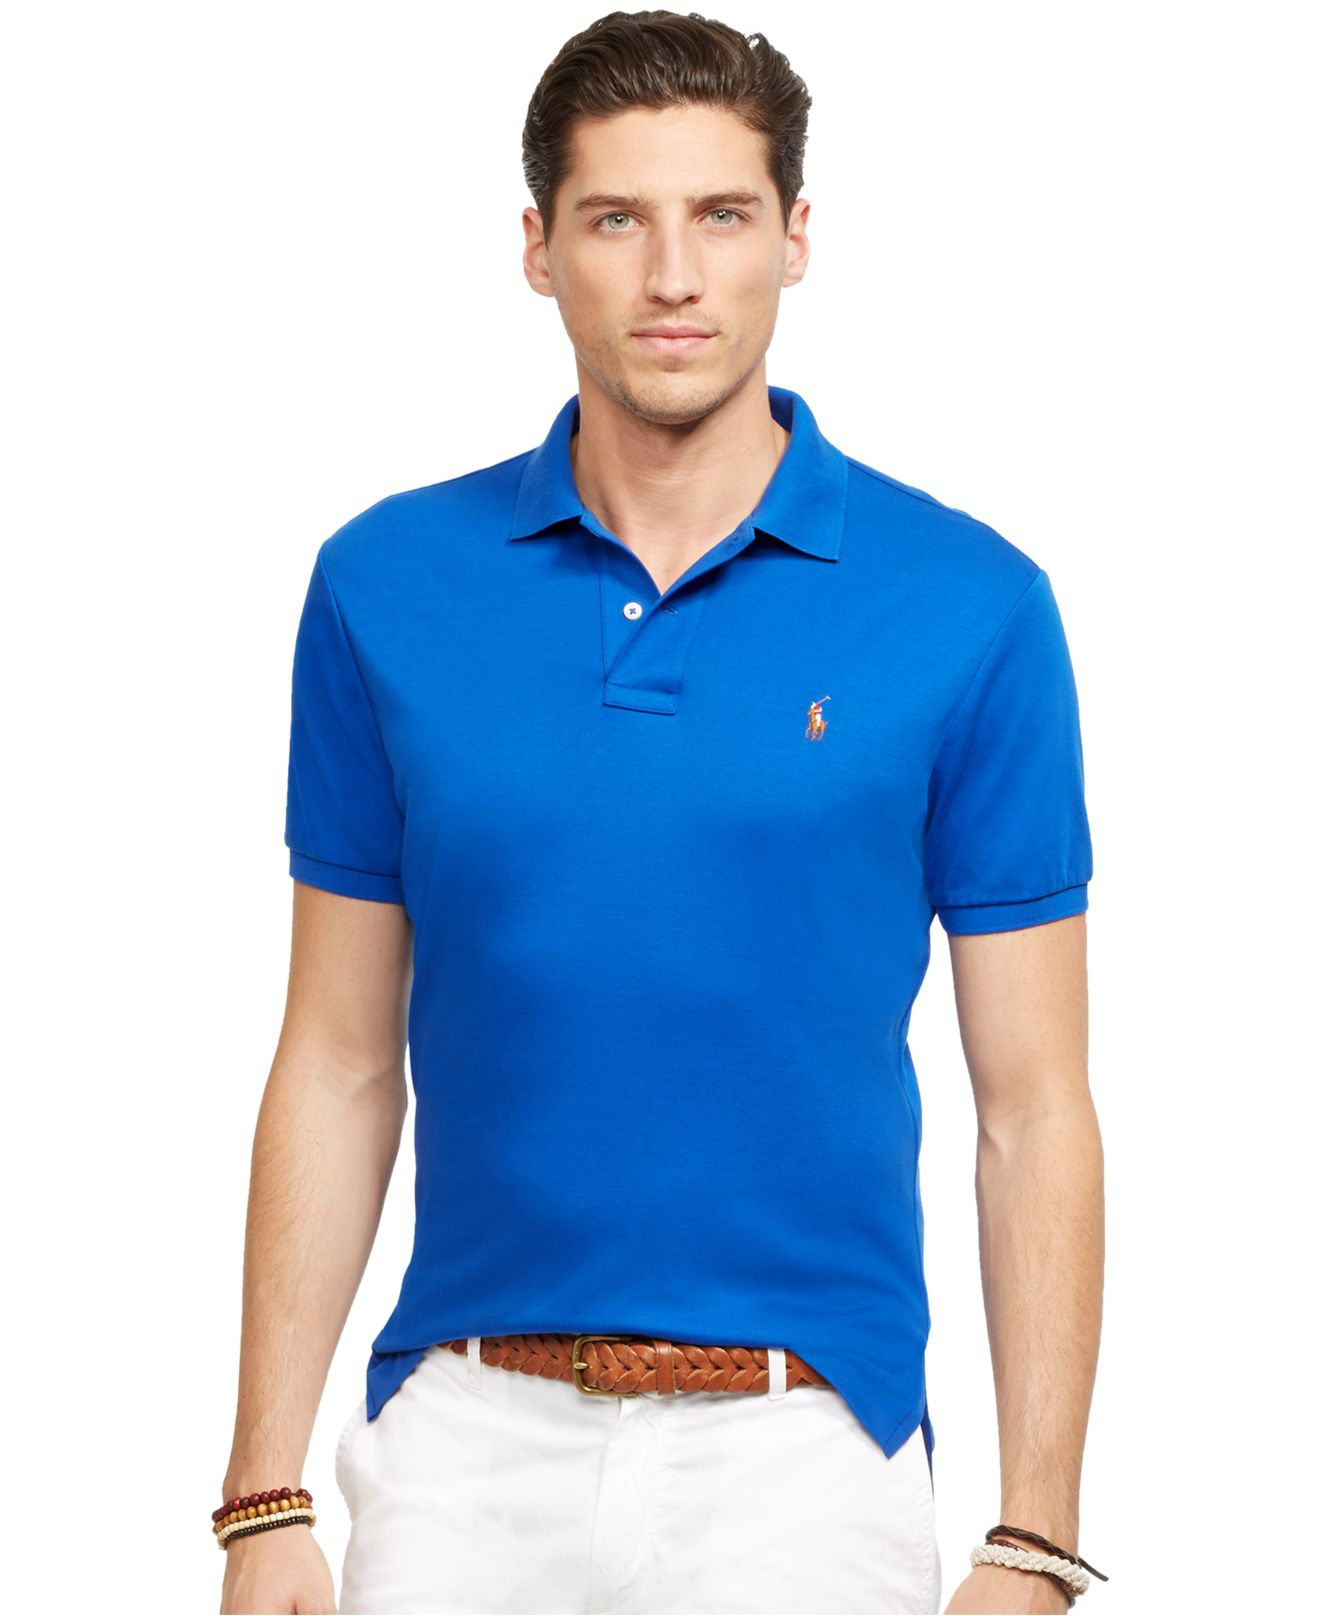 Polo Ralph Lauren Cotton Pima Soft-touch Polo Shirt in Blue for Men - Lyst